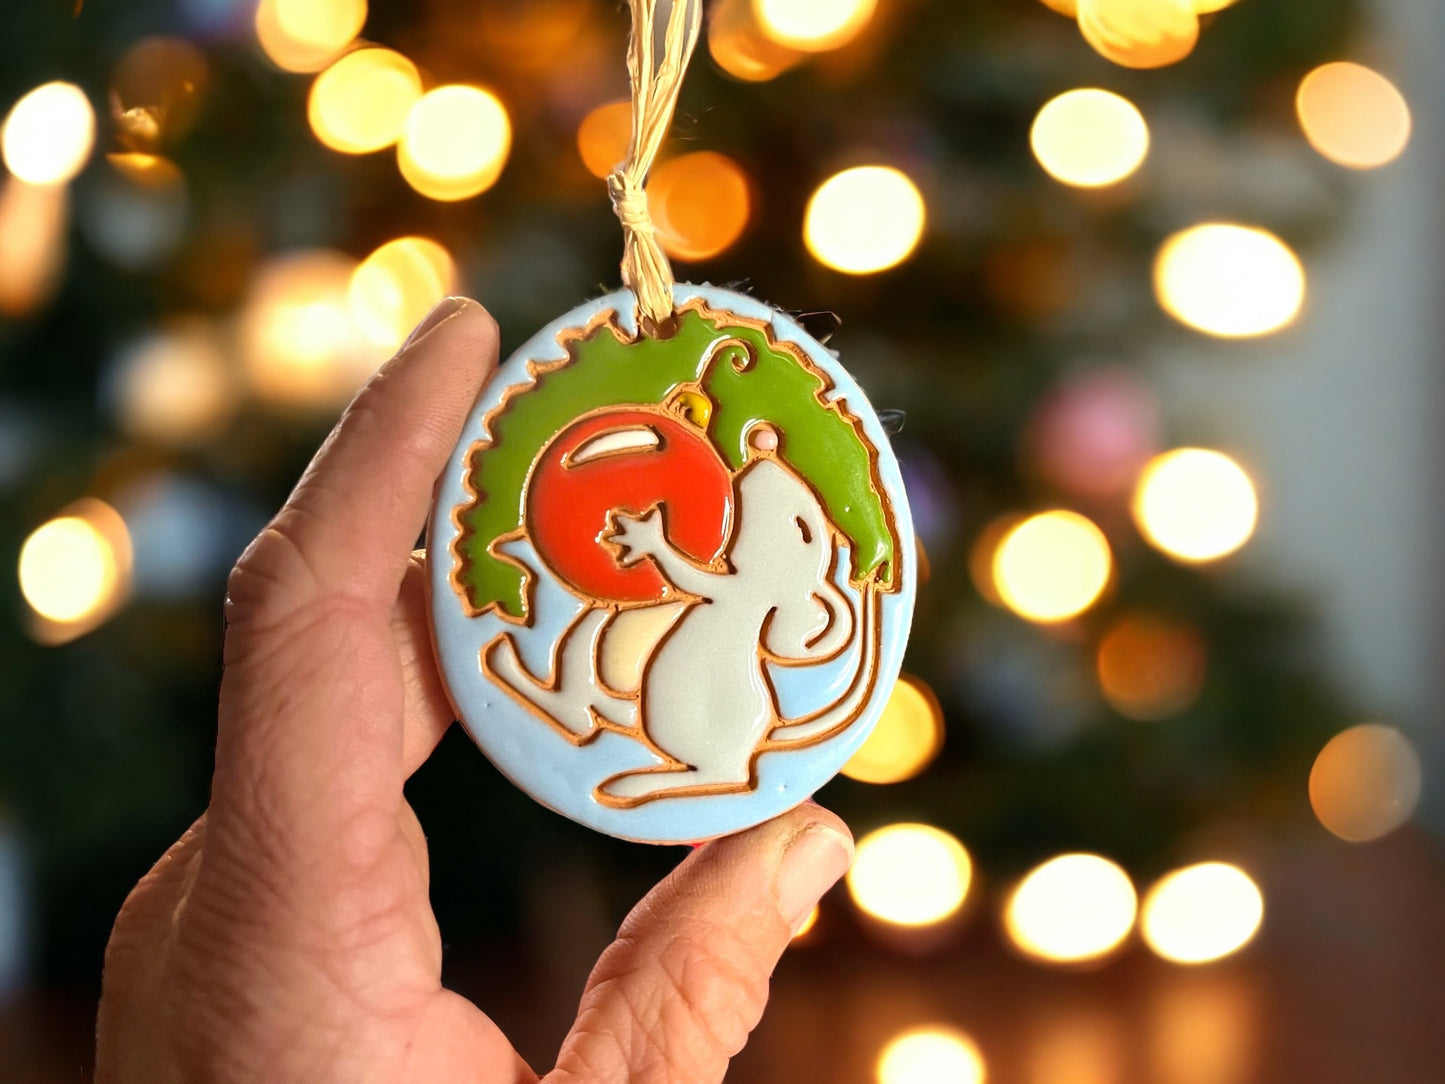 Christmas Mouse Ornament “Mouse Decorating”